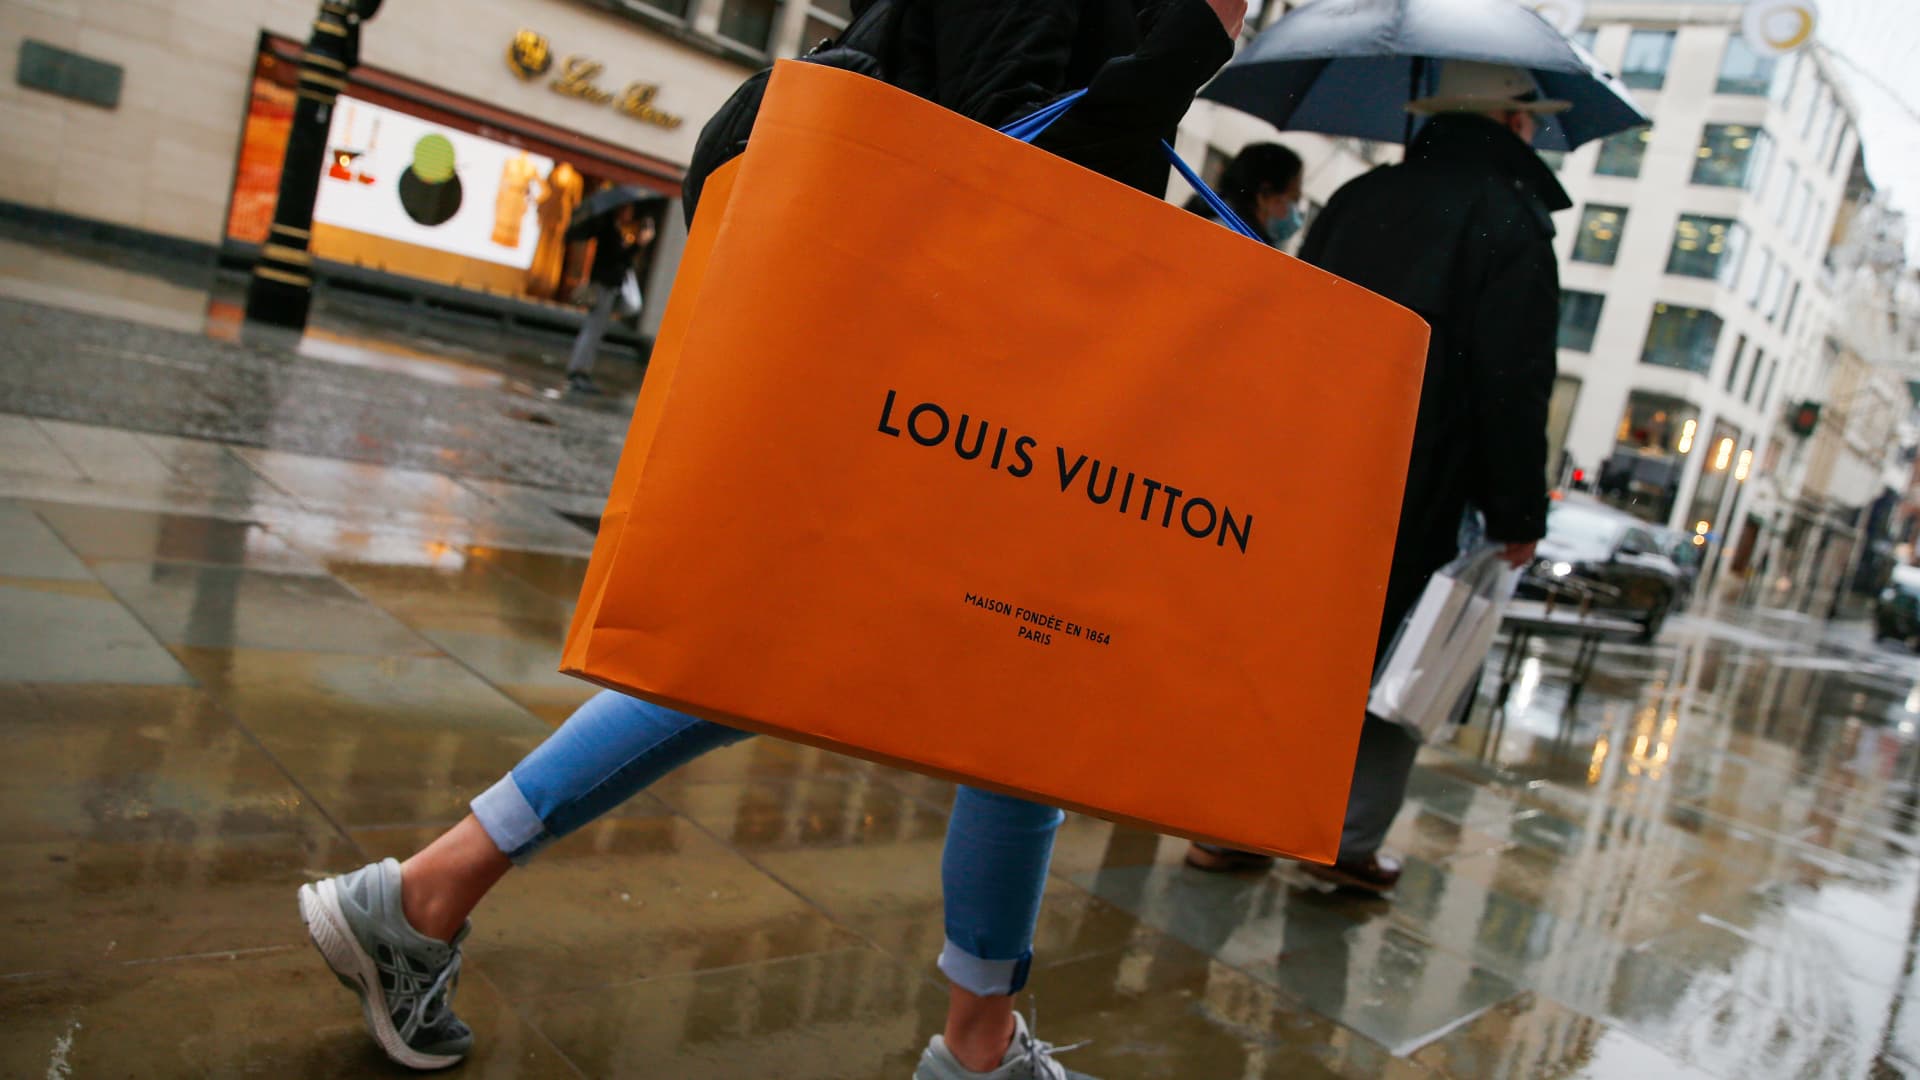 France : LVMH buys Louis Vuitton building in low-profile, record